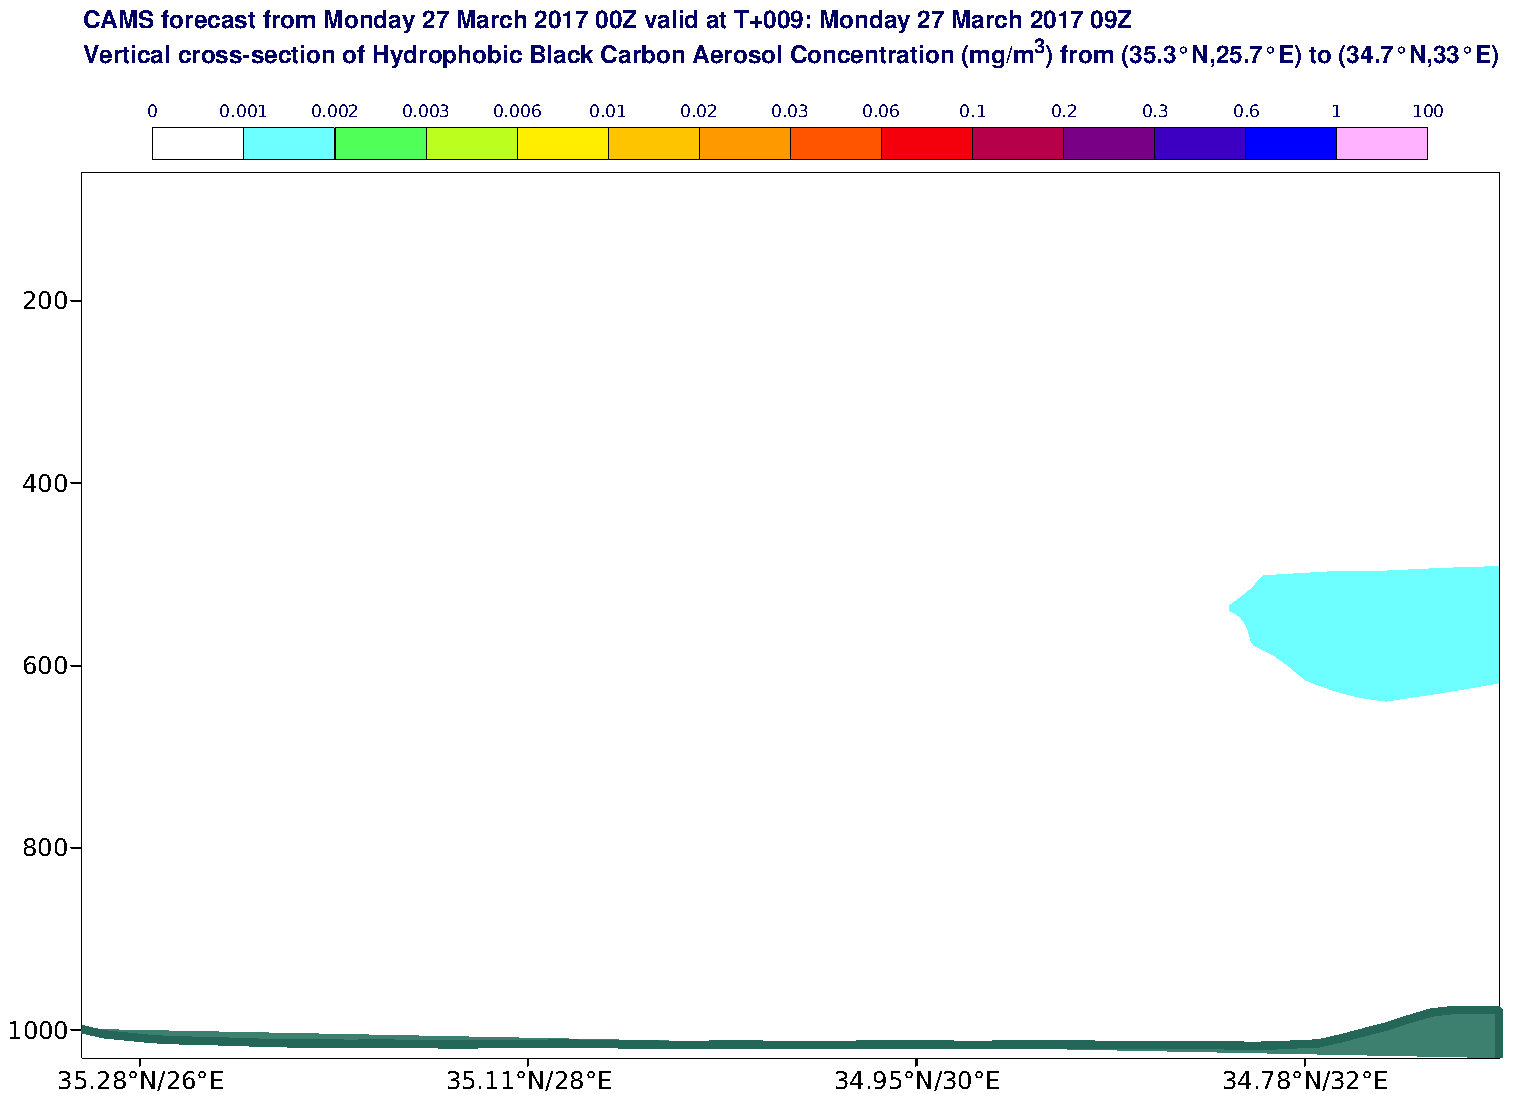 Vertical cross-section of Hydrophobic Black Carbon Aerosol Concentration (mg/m3) valid at T9 - 2017-03-27 09:00